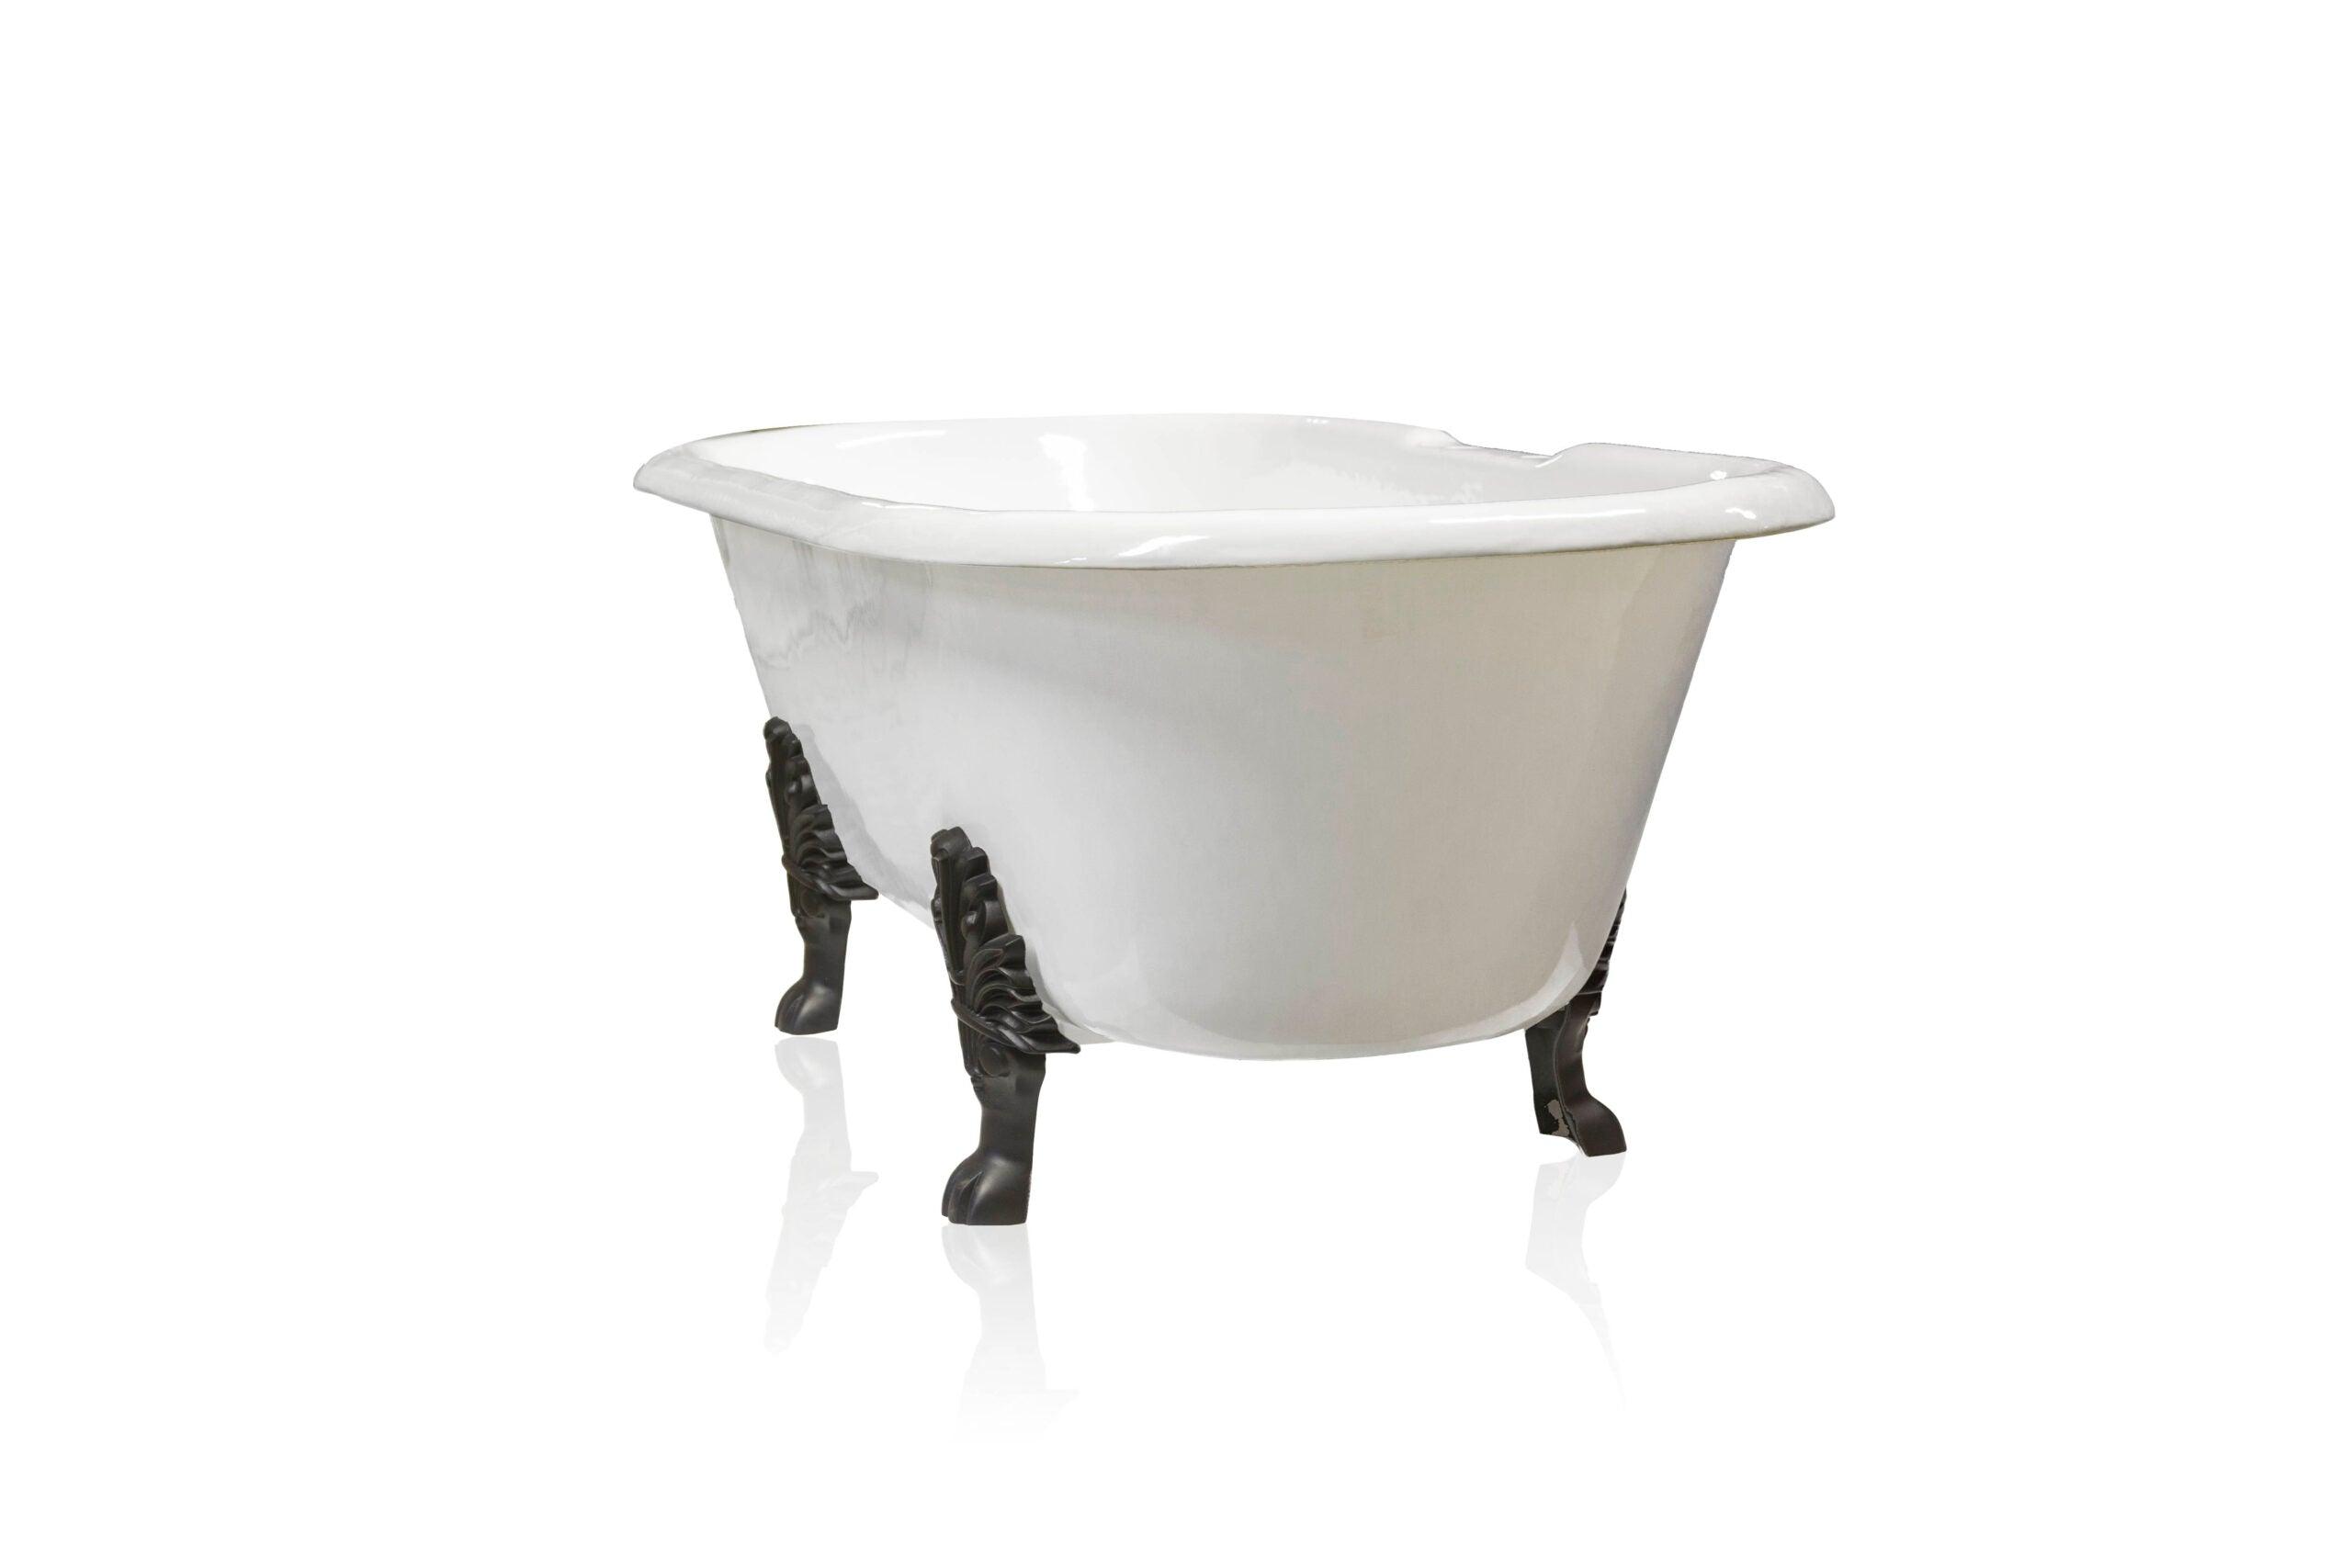 WatermarkFixtures Color Block Double 72″ Glossy White & Matte Black Antique Inspired Cast Iron Concordia Clawfoot Bathtub - Bathroom Design Center